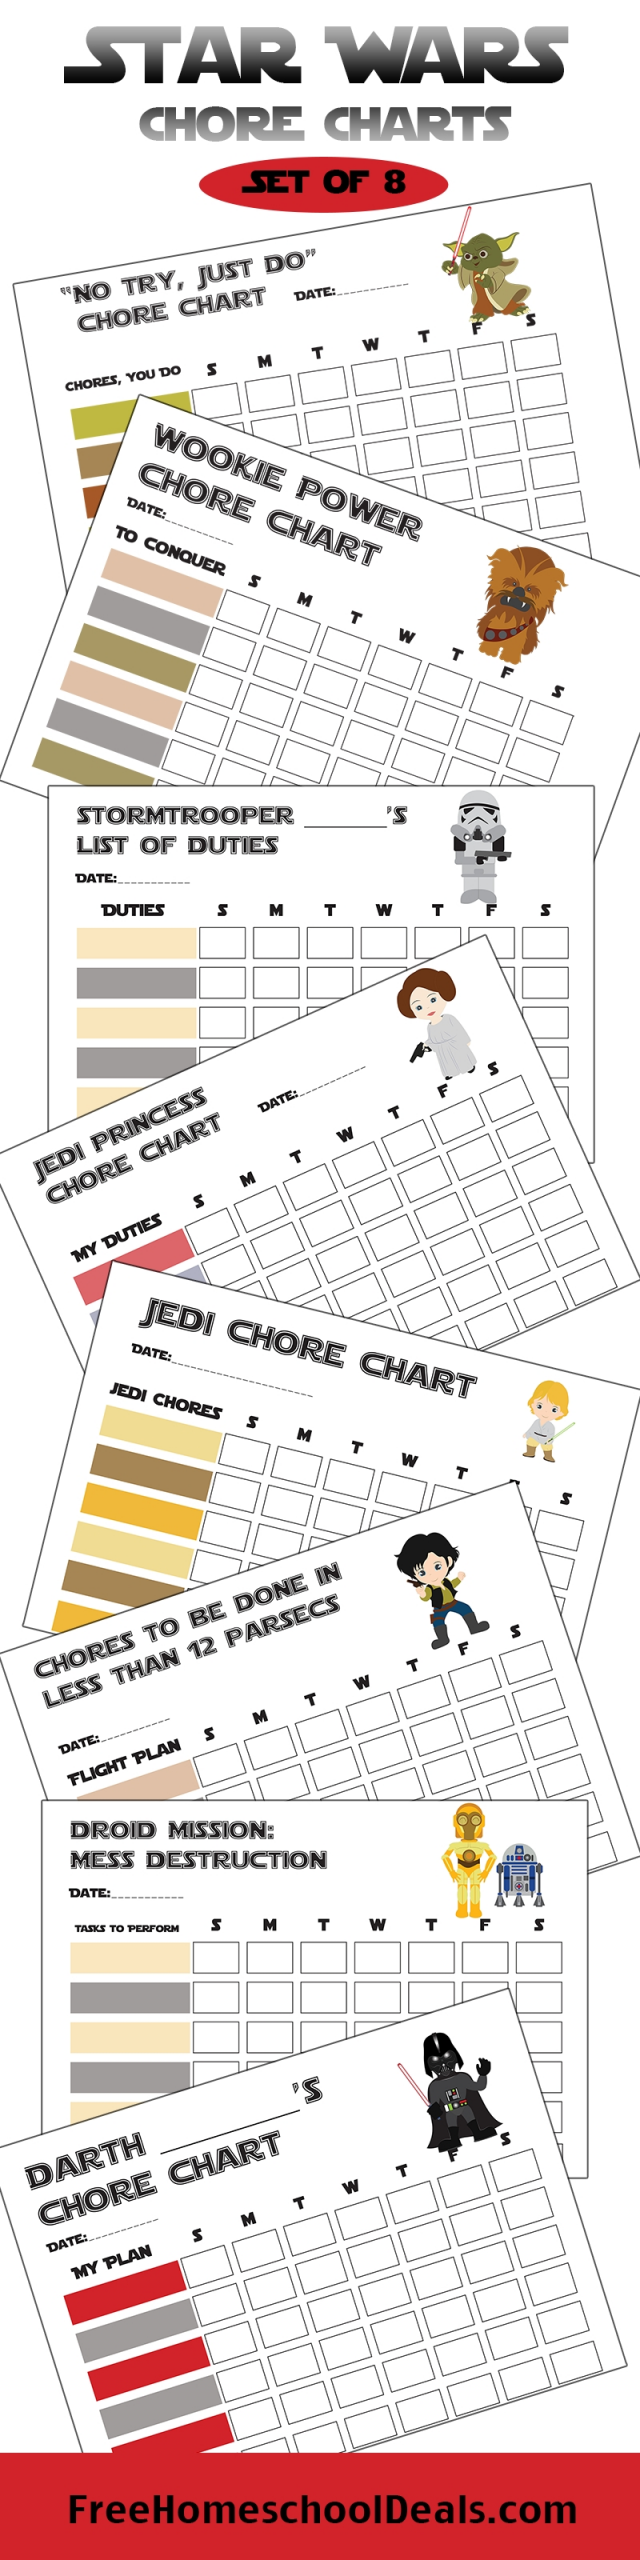 Free Printable Star Wars Chore Charts (instant Download!)